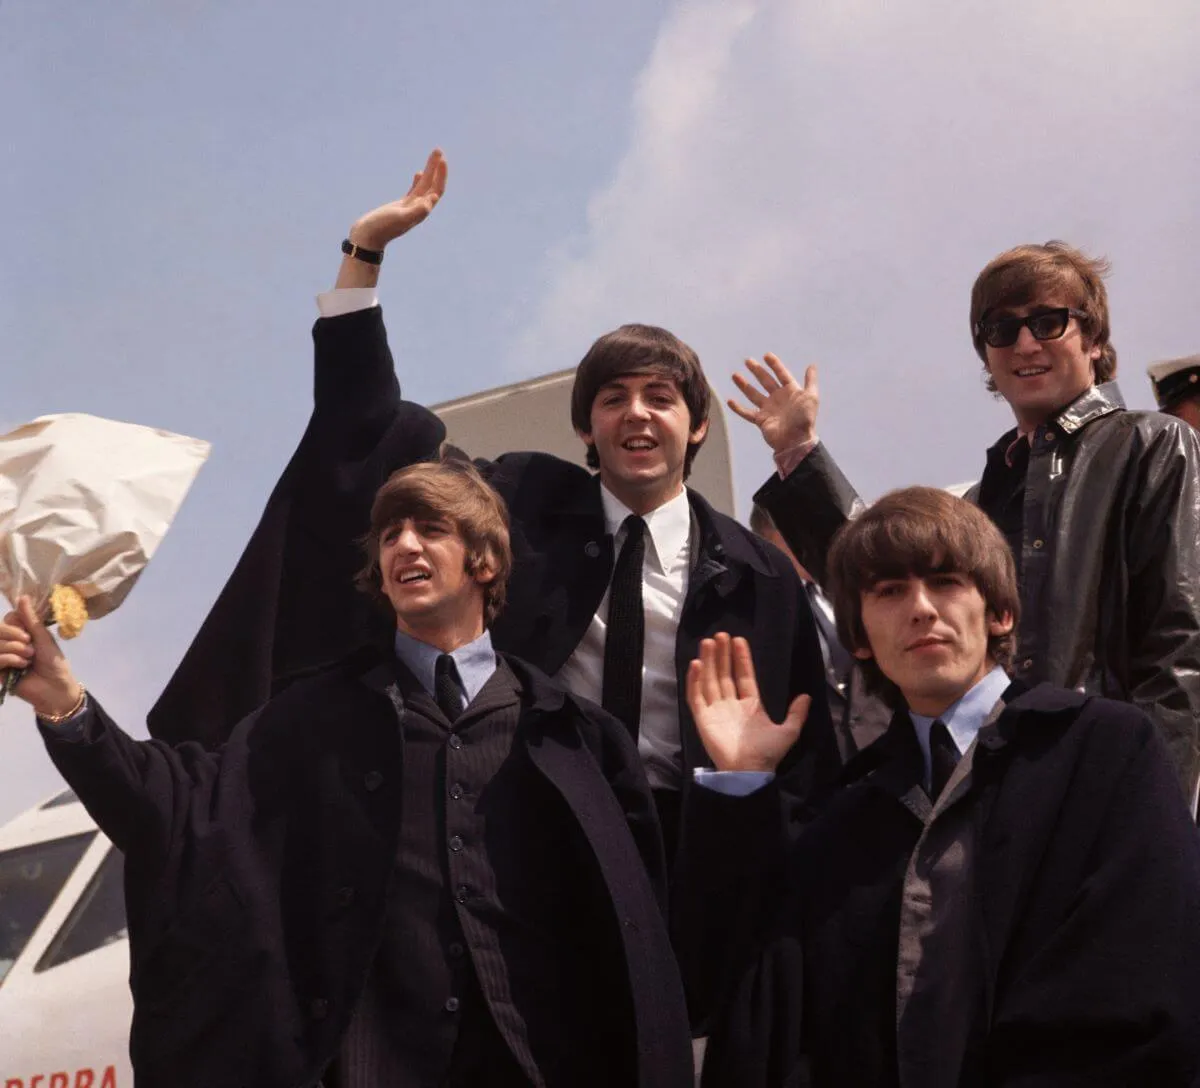 The Beatles wear suits and wave from the open door of an airplane.